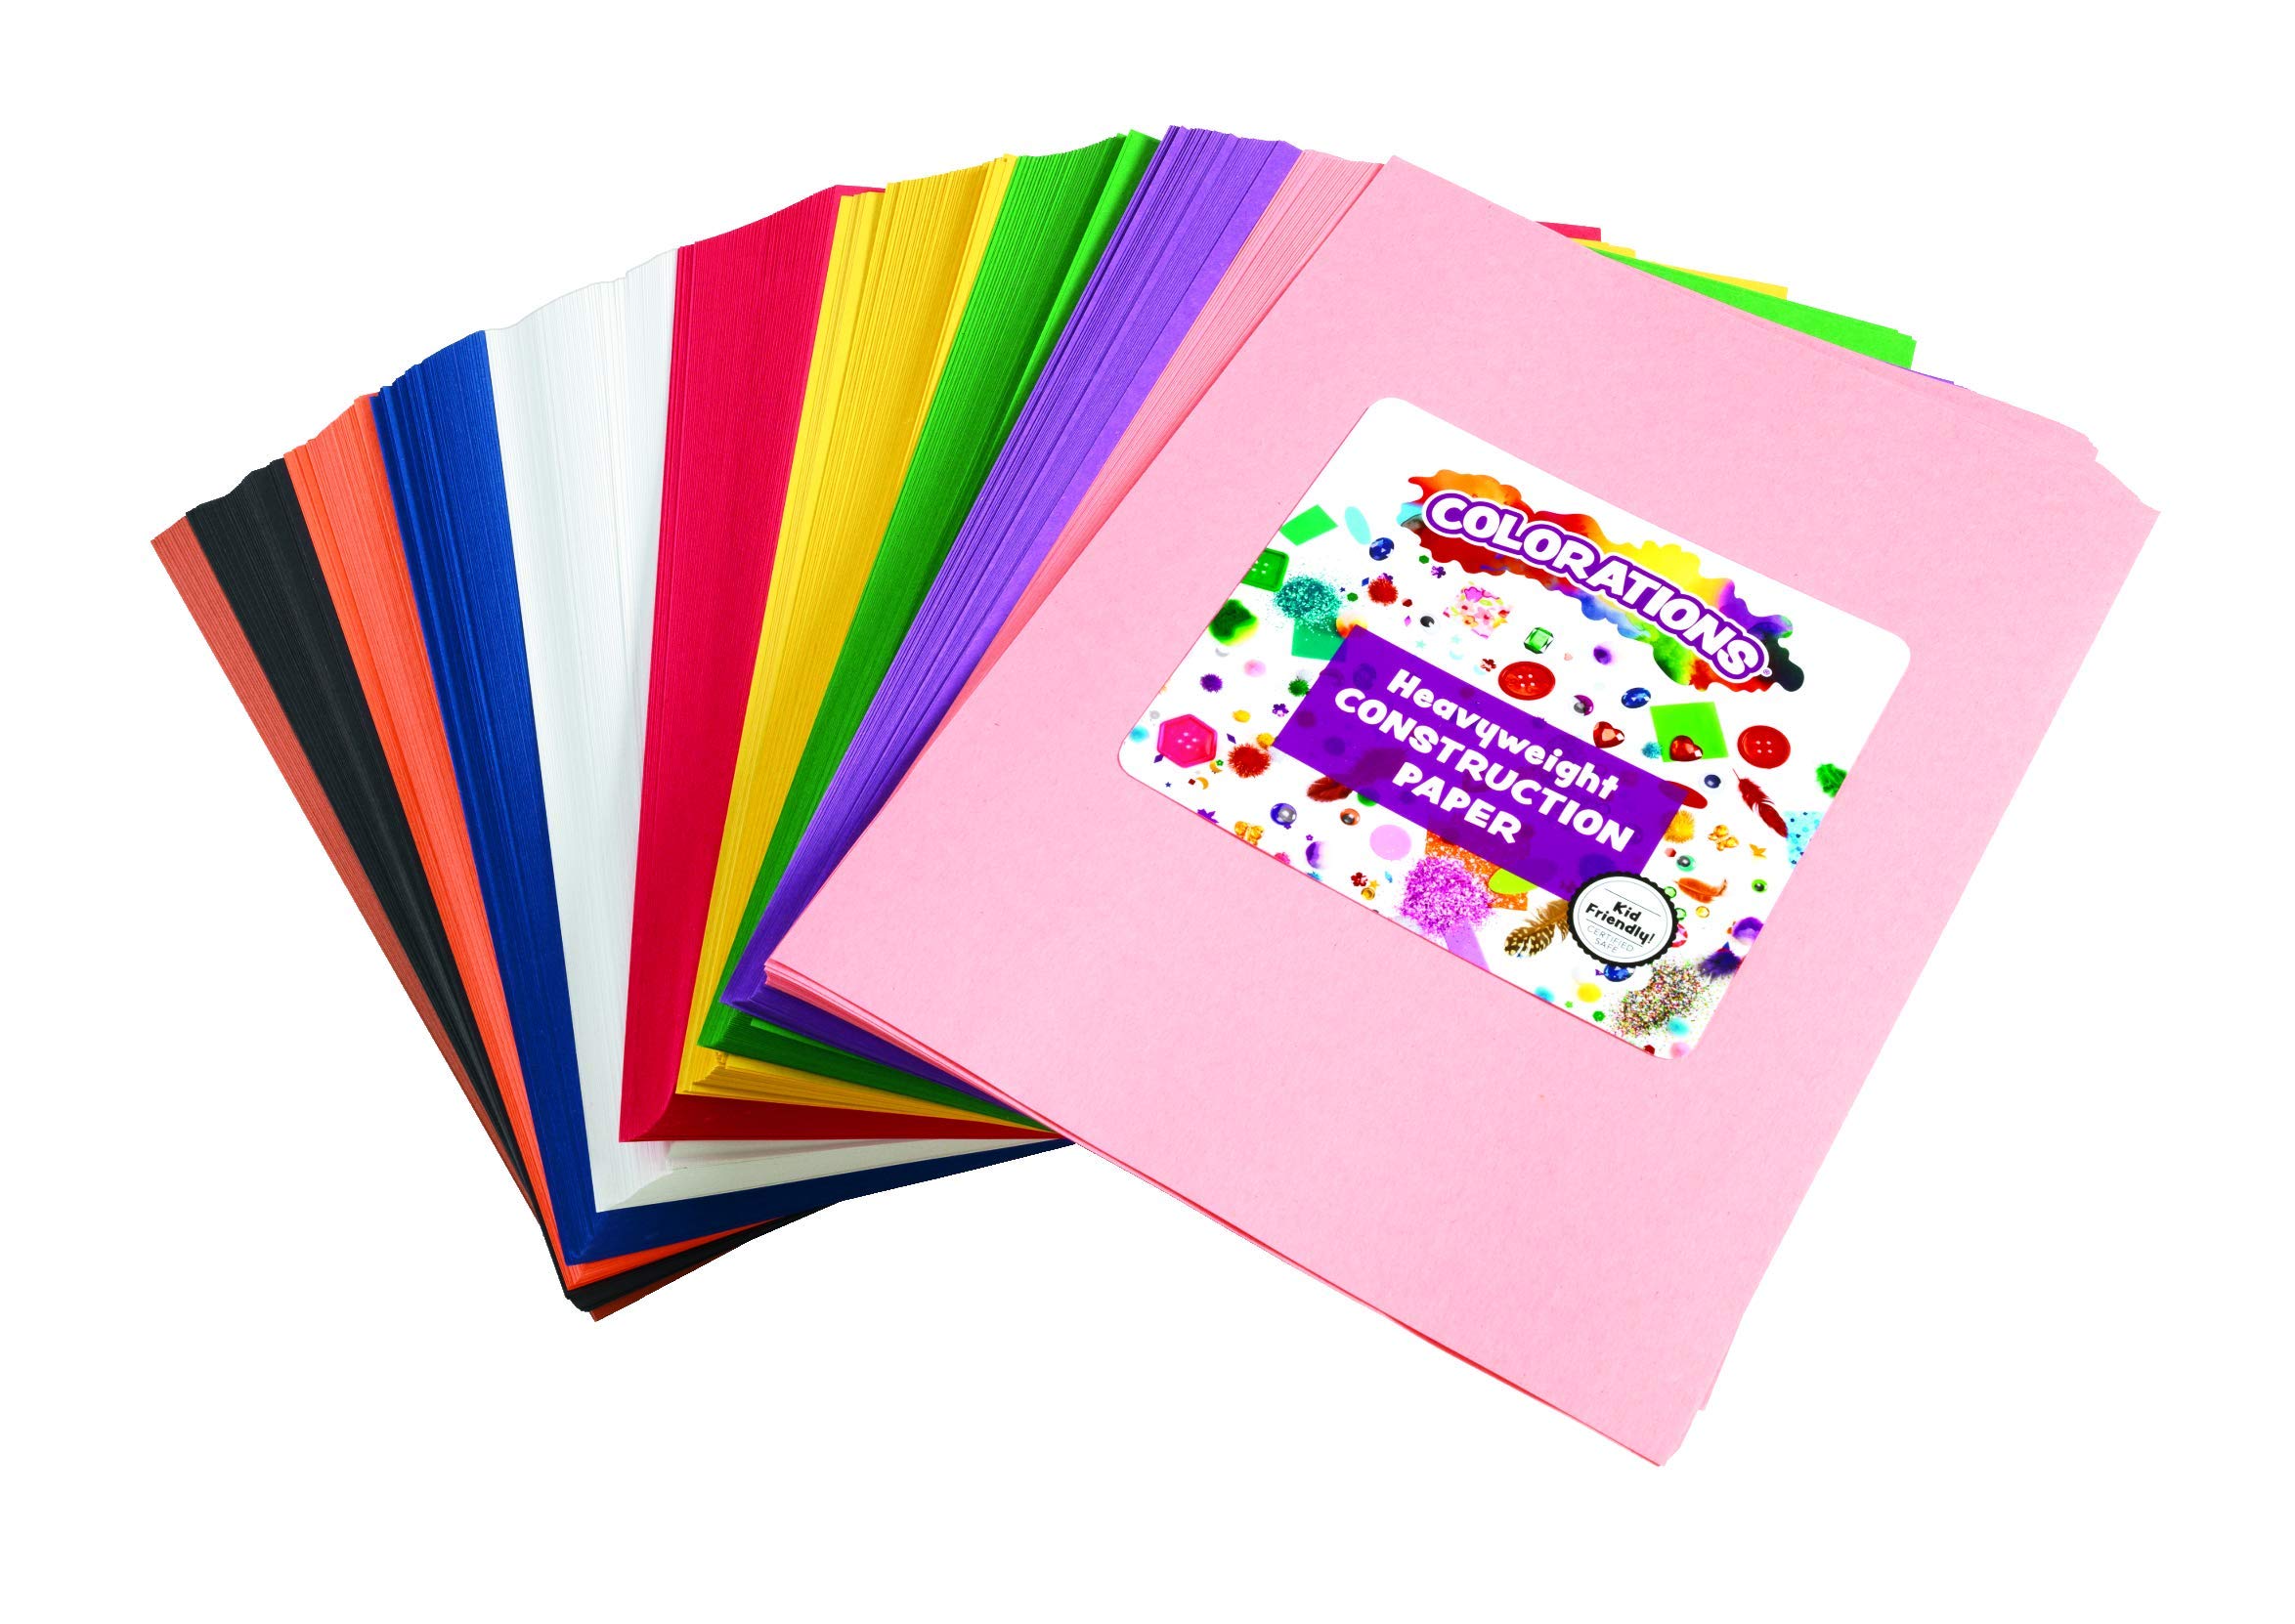 Colorations Color Construction Paper Smart Pack Assorted Color Paper  Colored Paper Coloring Paper Drawing Craft Paper Classroom Supplies Kids  Construction paper 600 Sheets Home Home School Use